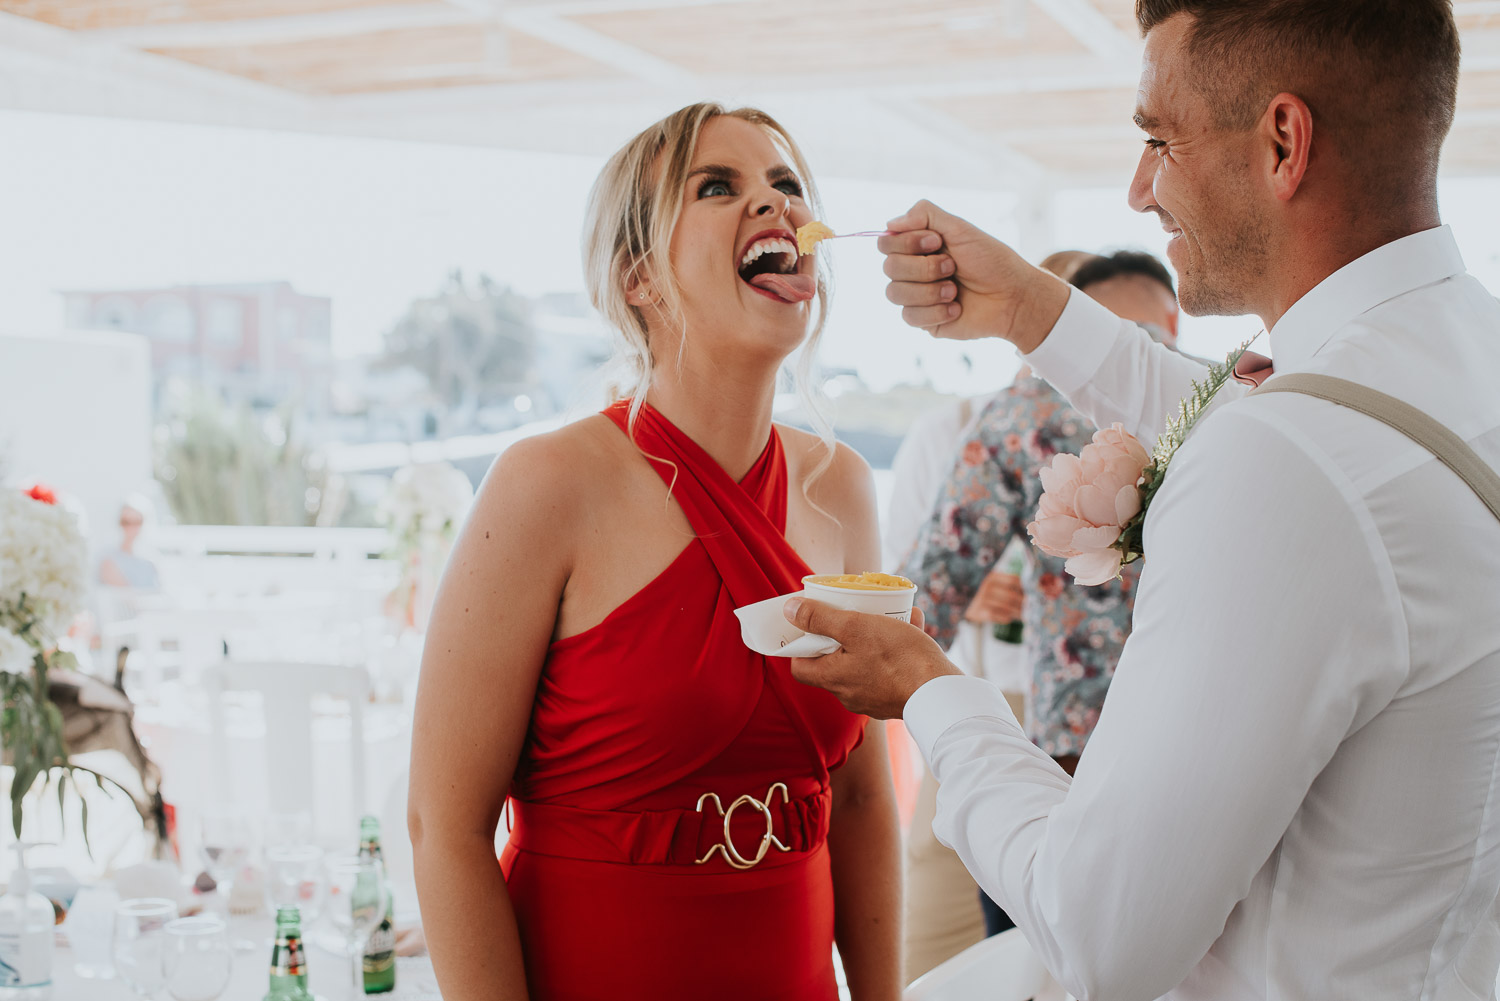 Wedding photographer Santorini: close up of a guest pulling faces as groom feeds her ice cream by Ben and Vesna.